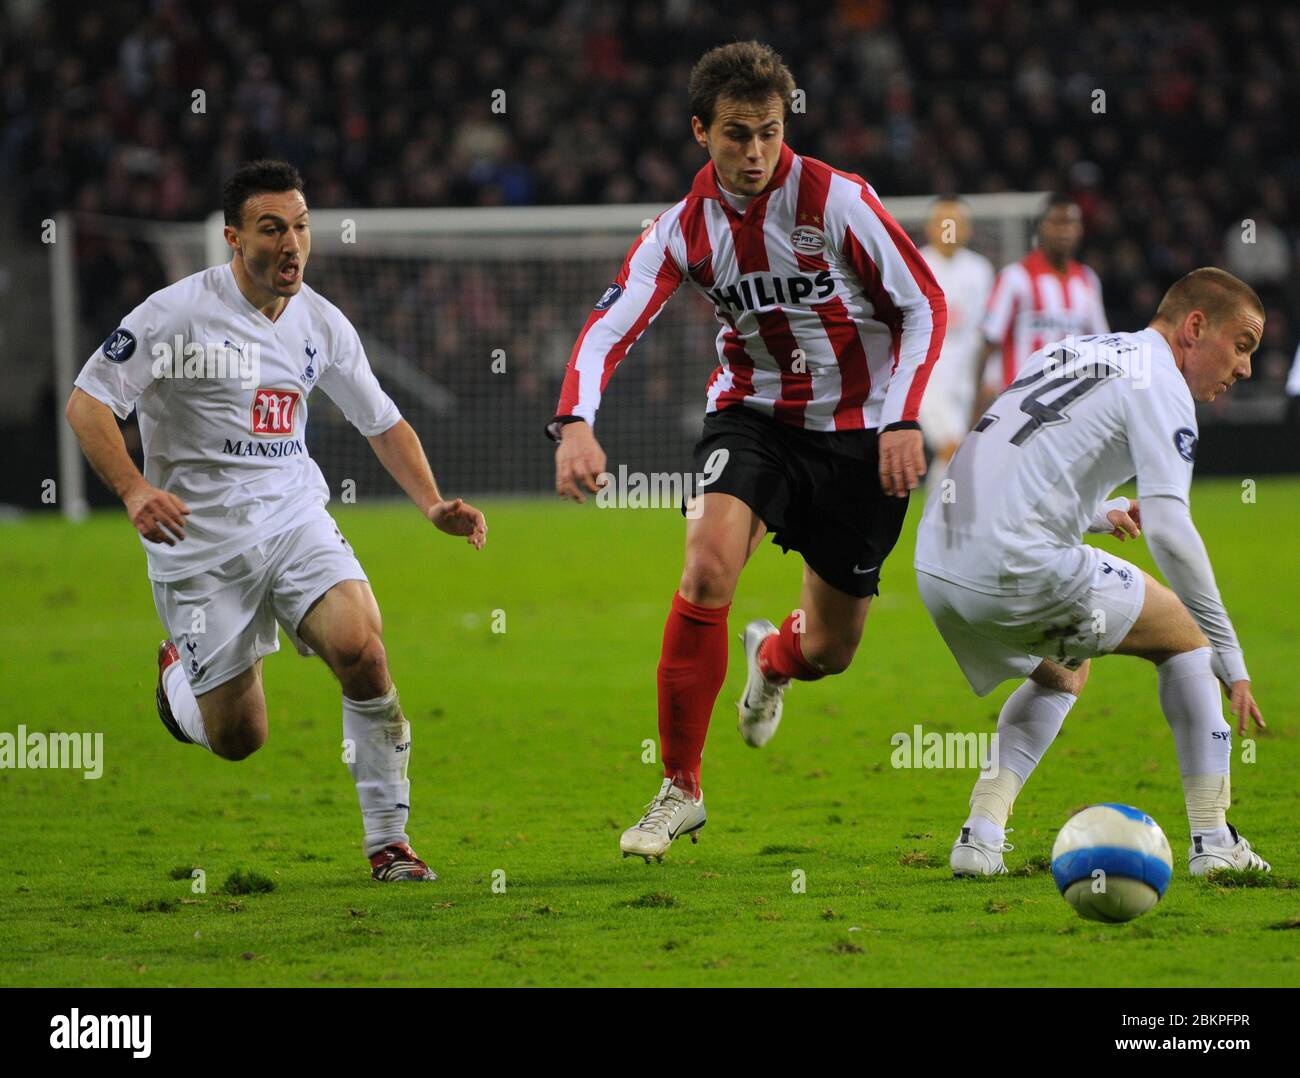 EINDHOVEN, NEDERLAND. MARCH 12: Danko Lazovic of PSV Eindhoven During UEFA Cup Round of 16 Second Leg between PSV Eindhoven and Tottenham Hotspur at Stock Photo